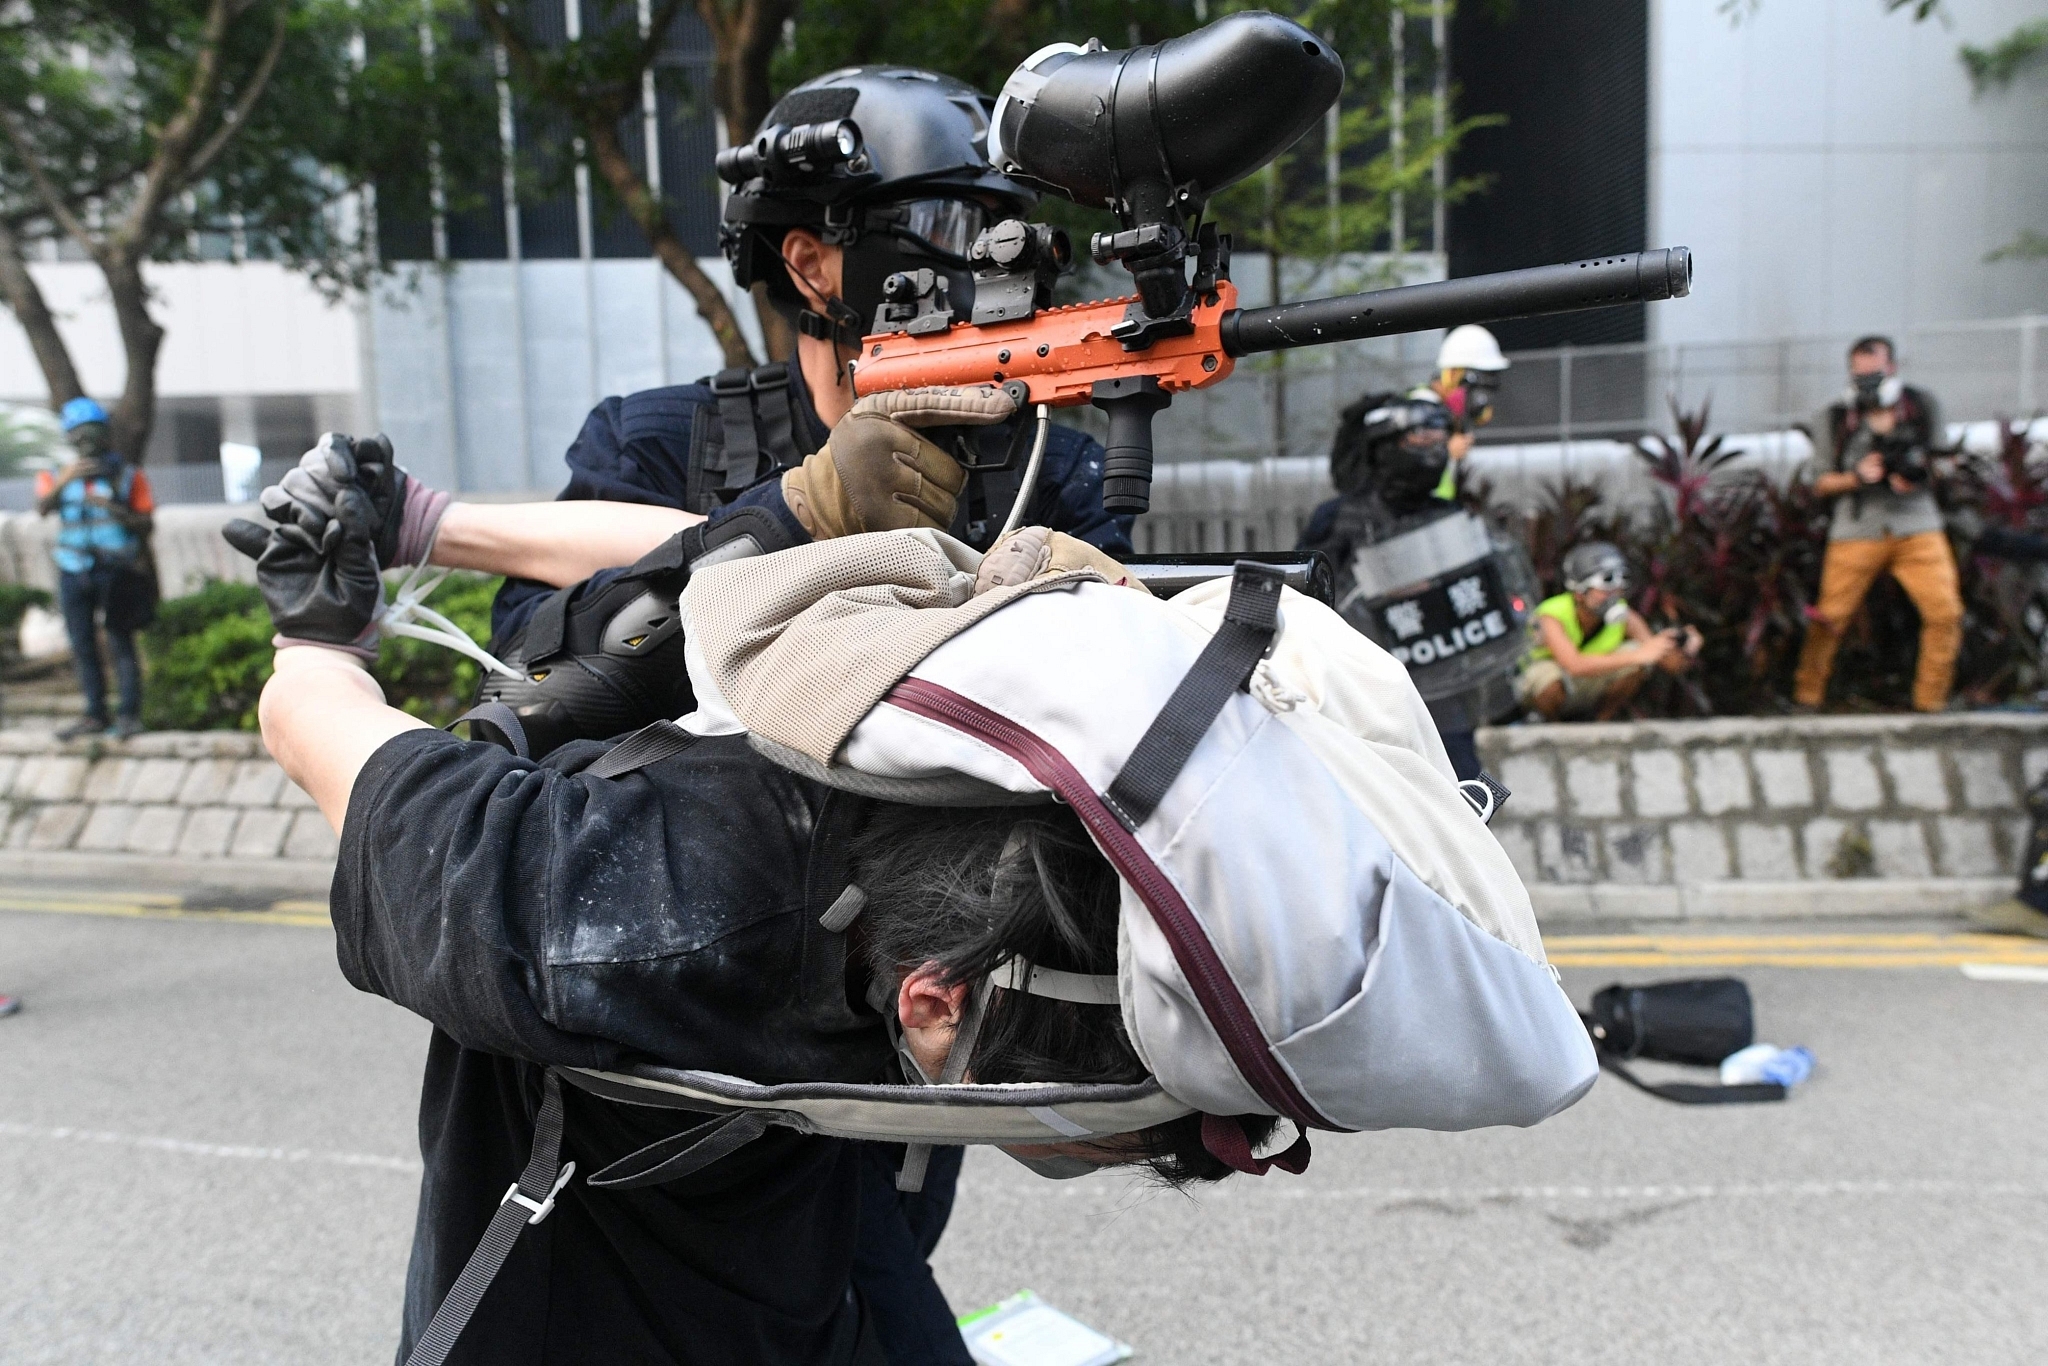 Hong Kong Police using subdued protester as gun mount during widespread protests last year (via Twitter)